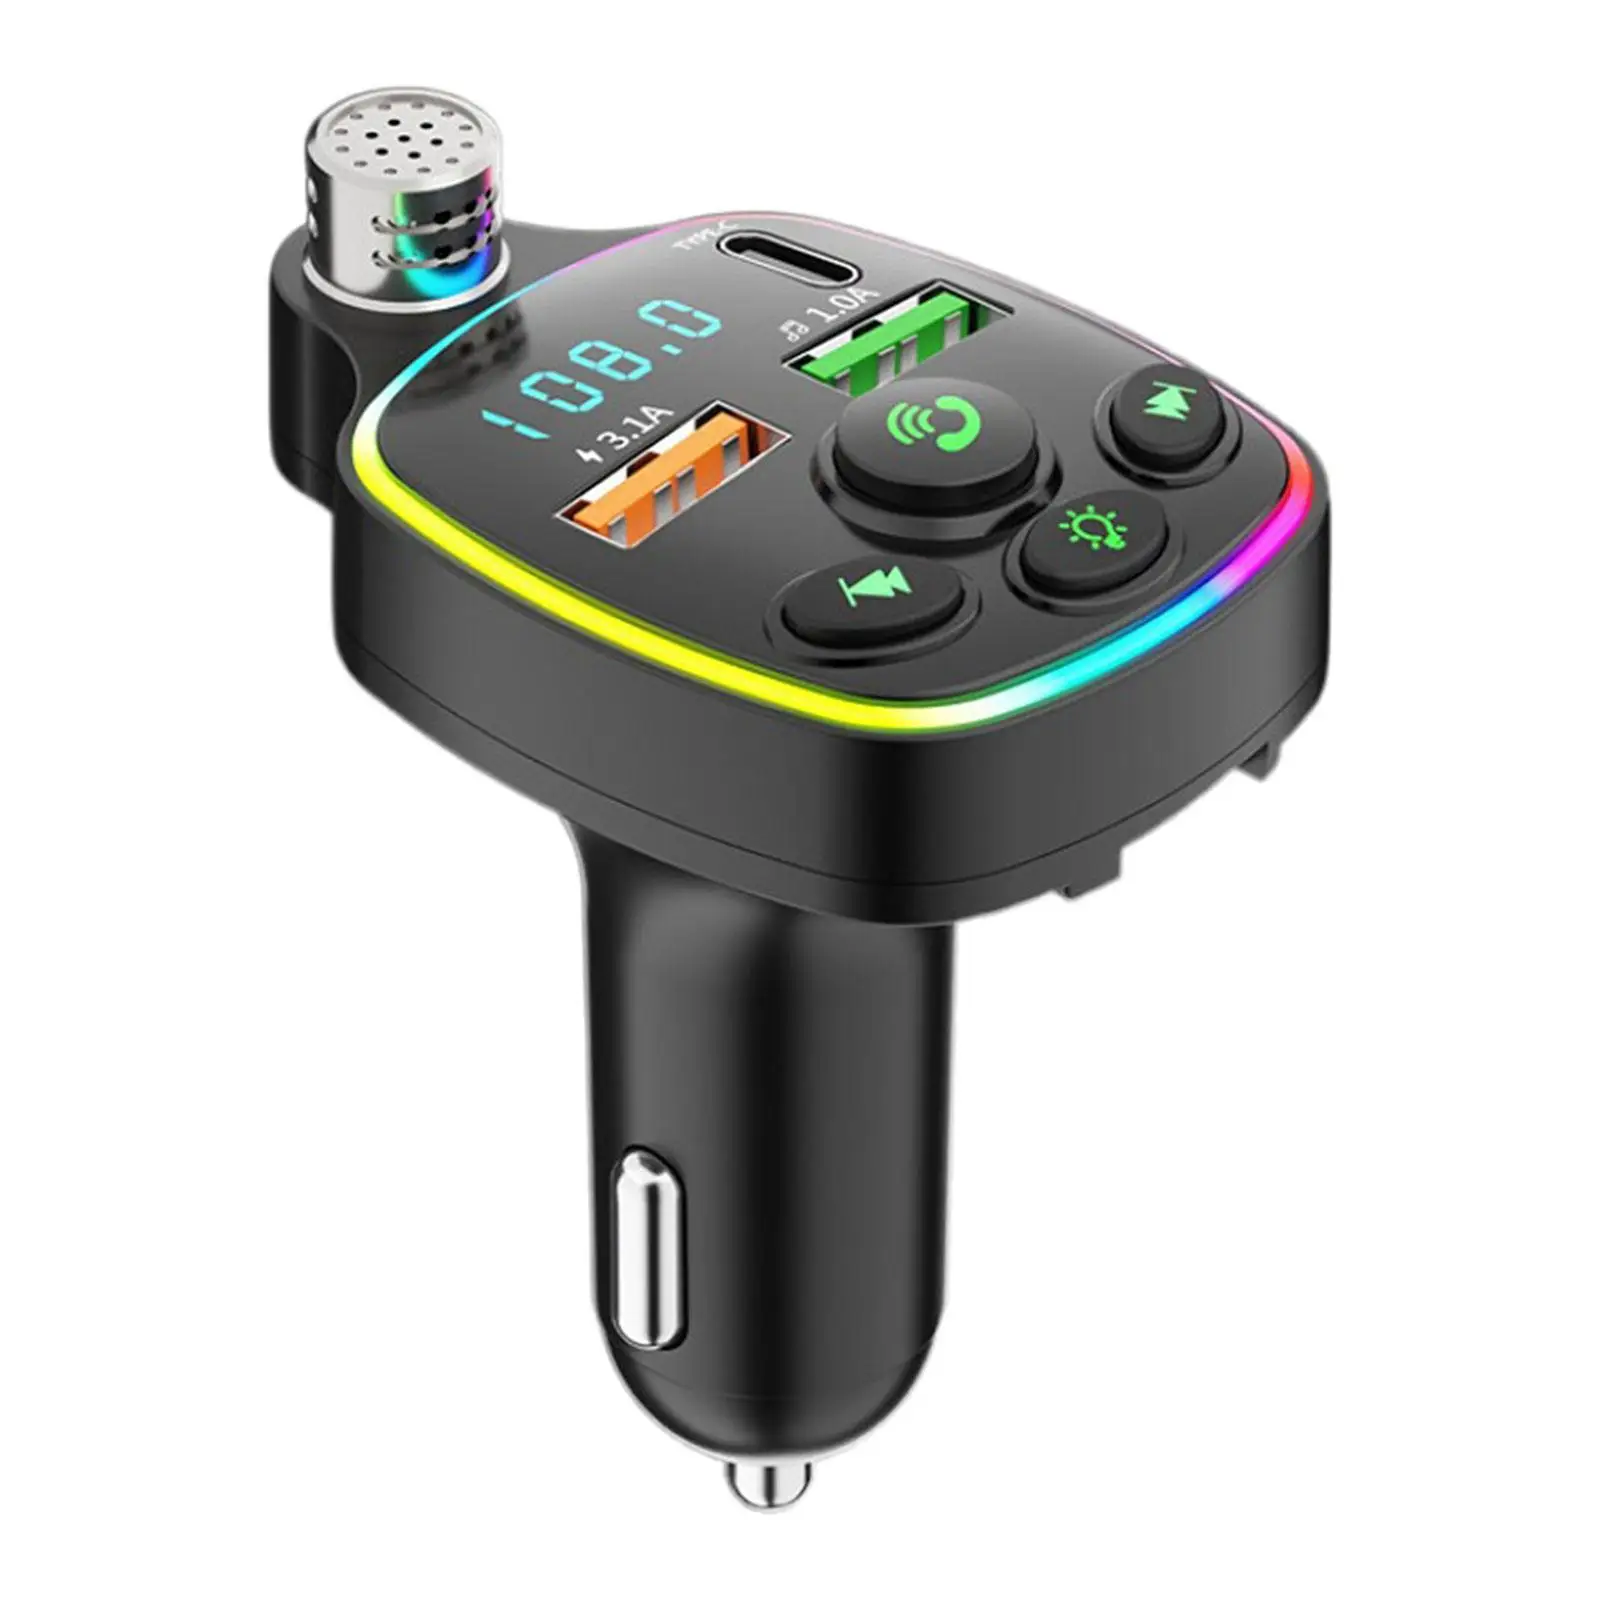 Car Adapter Support U Disk Handsfree Calling Color LED Backlit Lossless Music Wireless FM Radio Transmitter MP3 Music Player